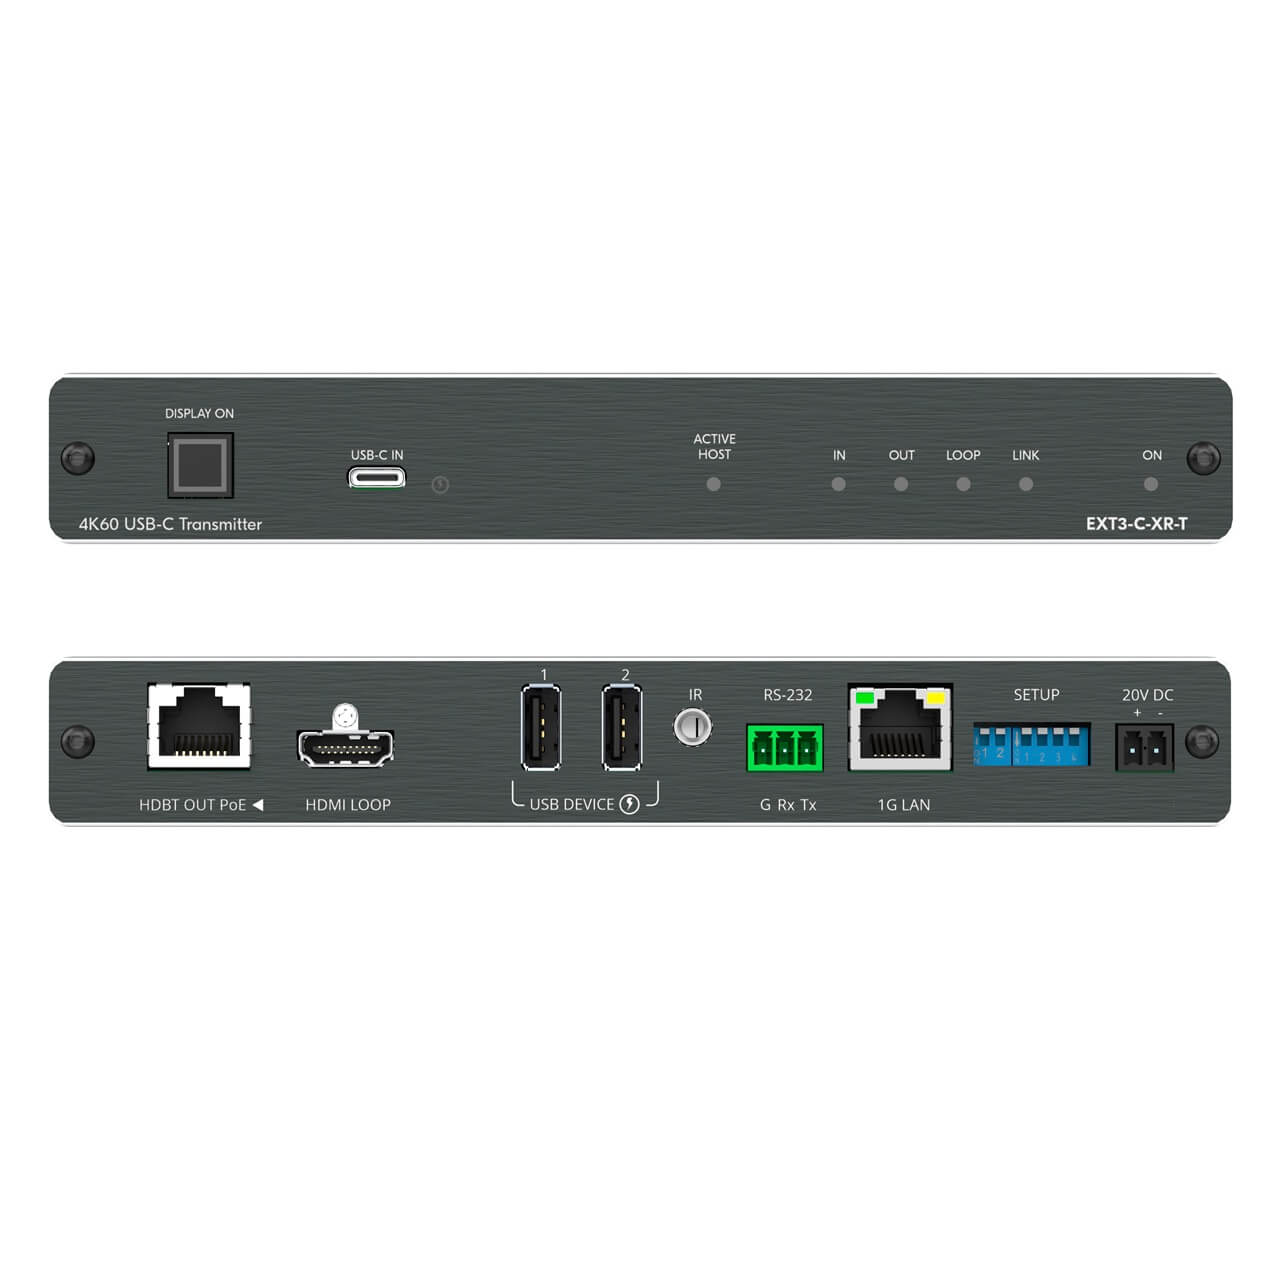 Kramer EXT3−C−XR−T - 4K60 HDMI, USB 2, 1G Ethernet HDBaseT Transmitter, front and rear combined views